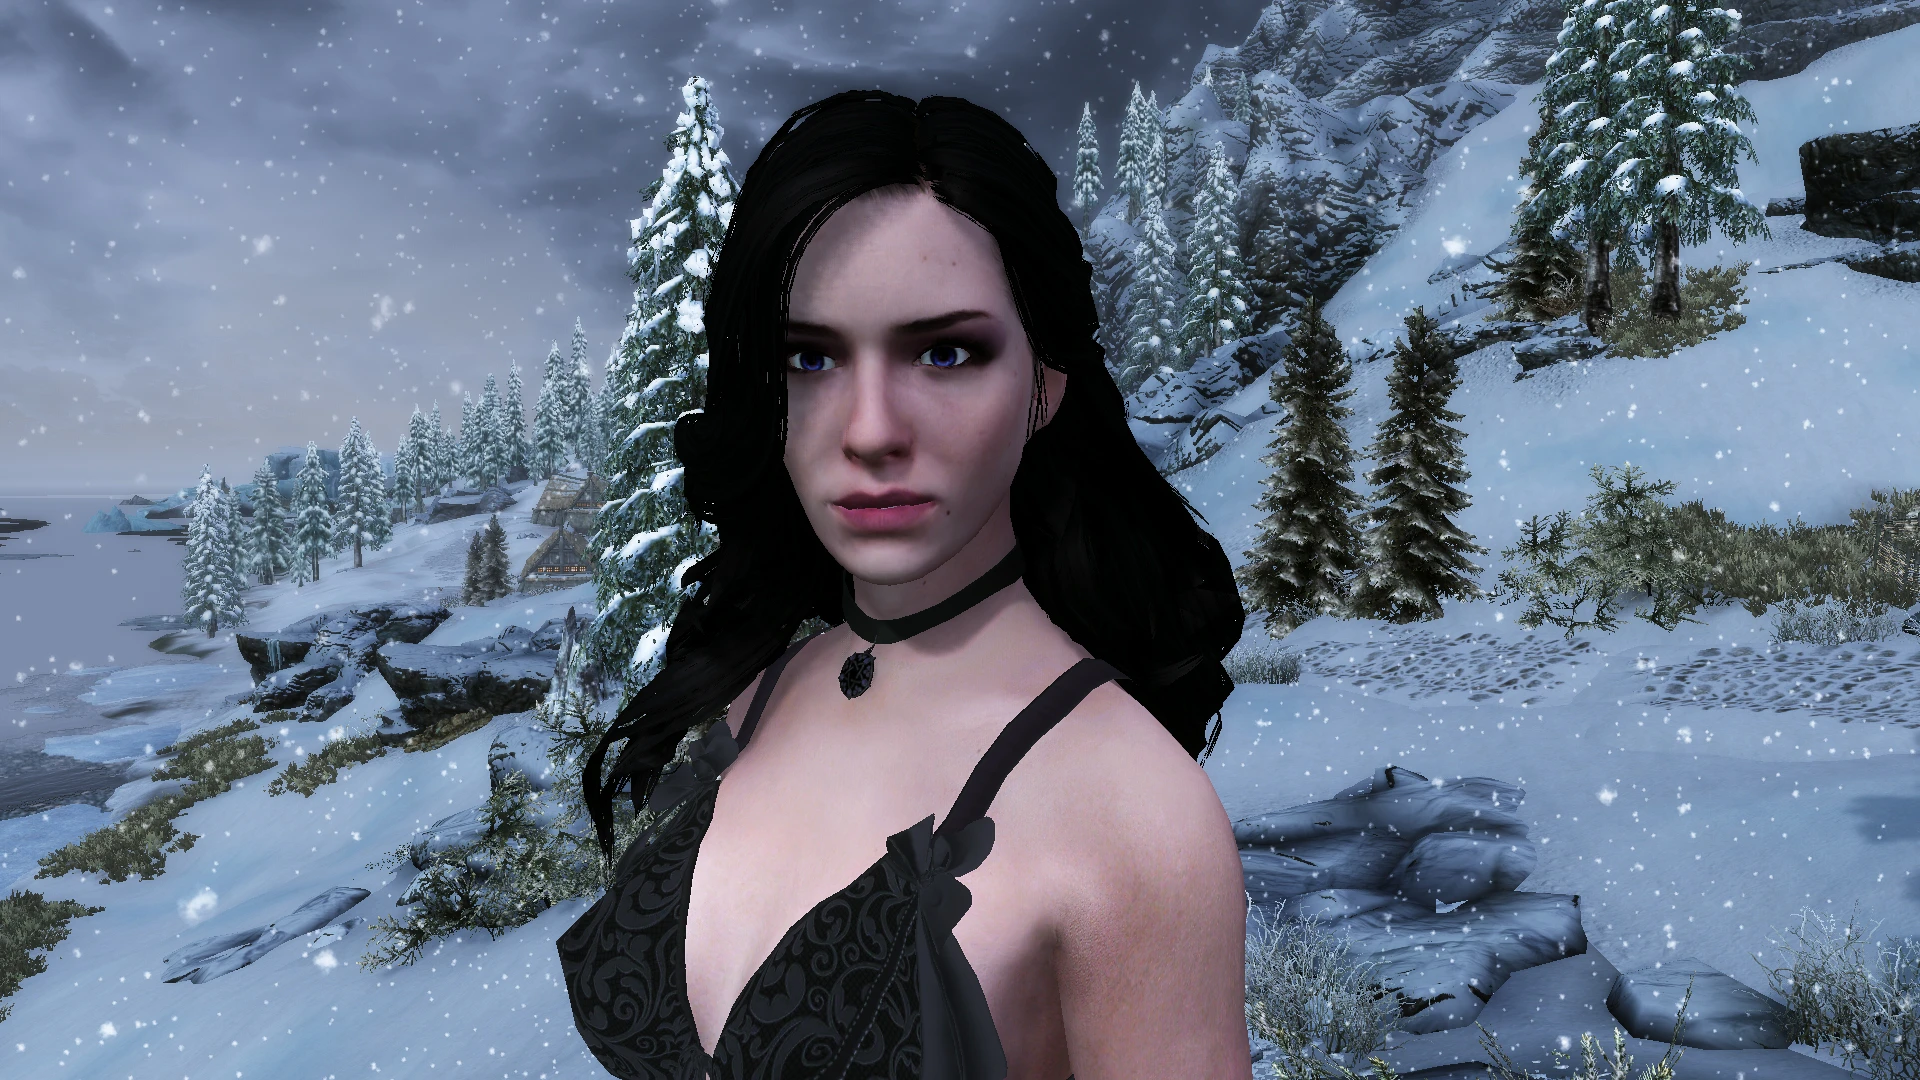 Yennefer of vengerberg the witcher 3 voiced standalone follower se фото 1